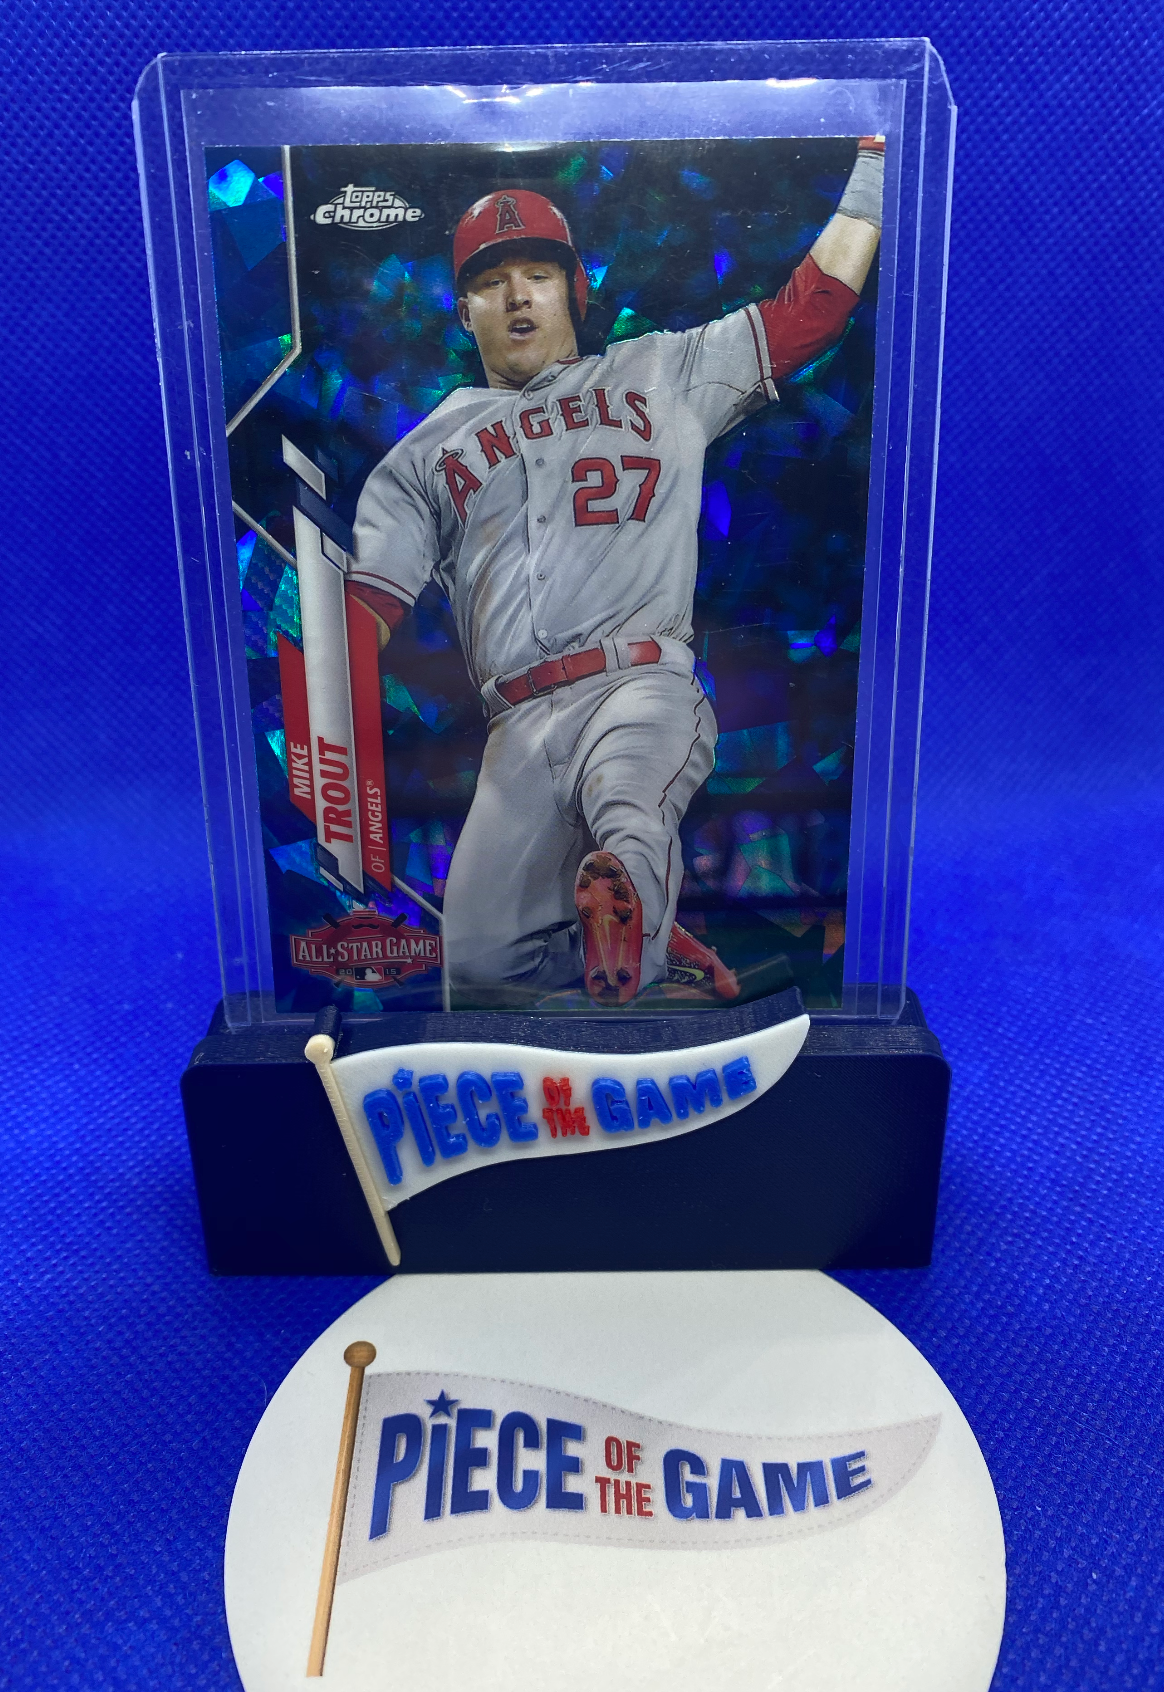 2020 Topps Chrome Sapphire All-Star Game Mike Trout – Piece Of The Game